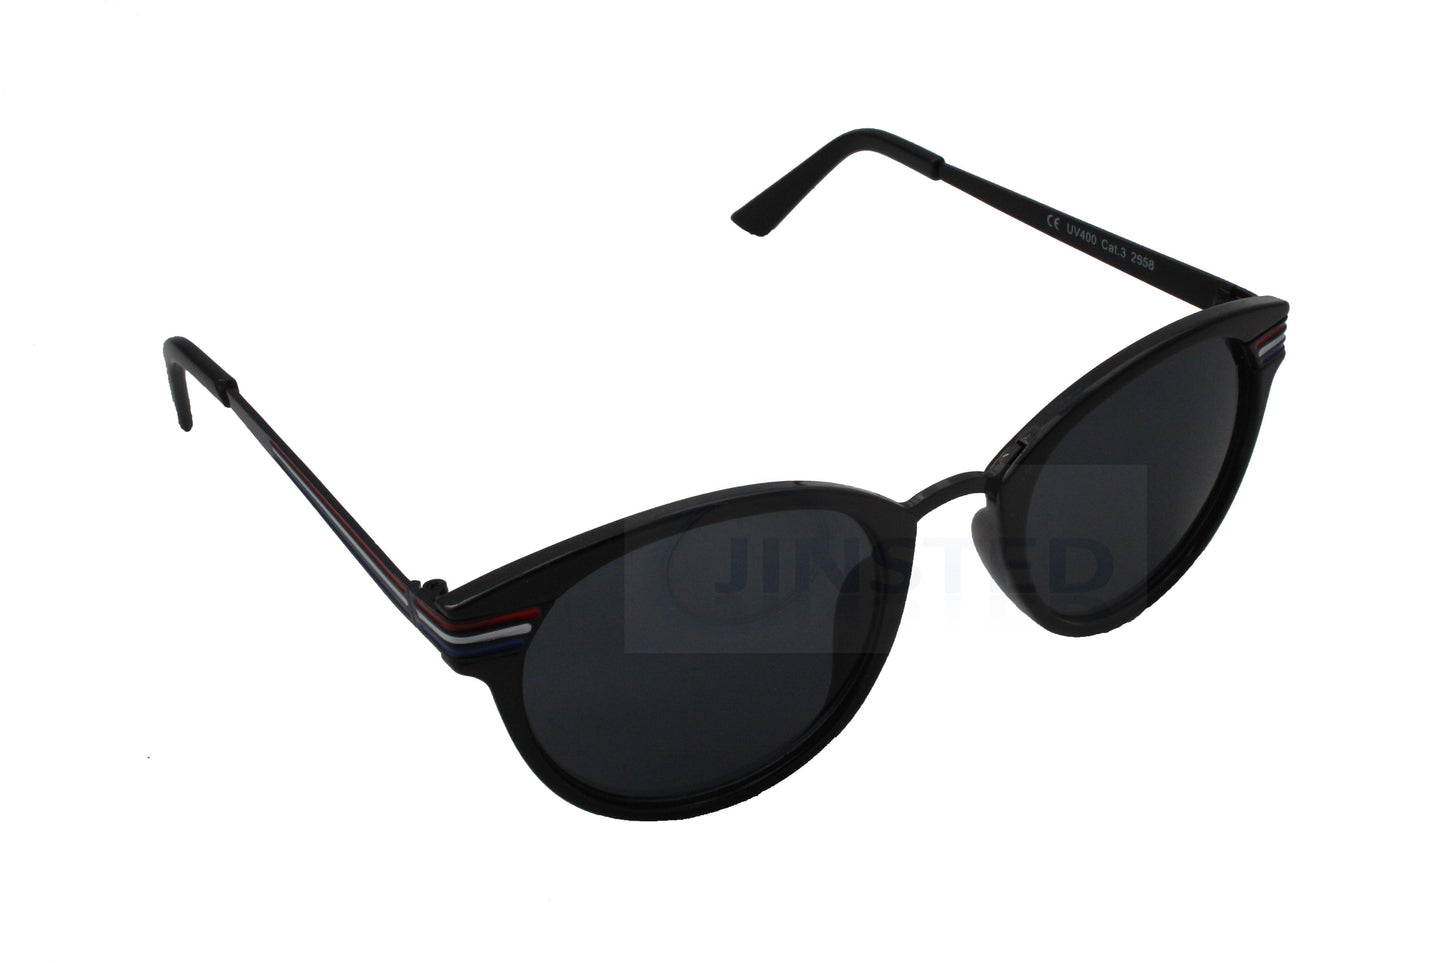 High Quality Black Round Sunglasses with Black Circle Frame - Jinsted